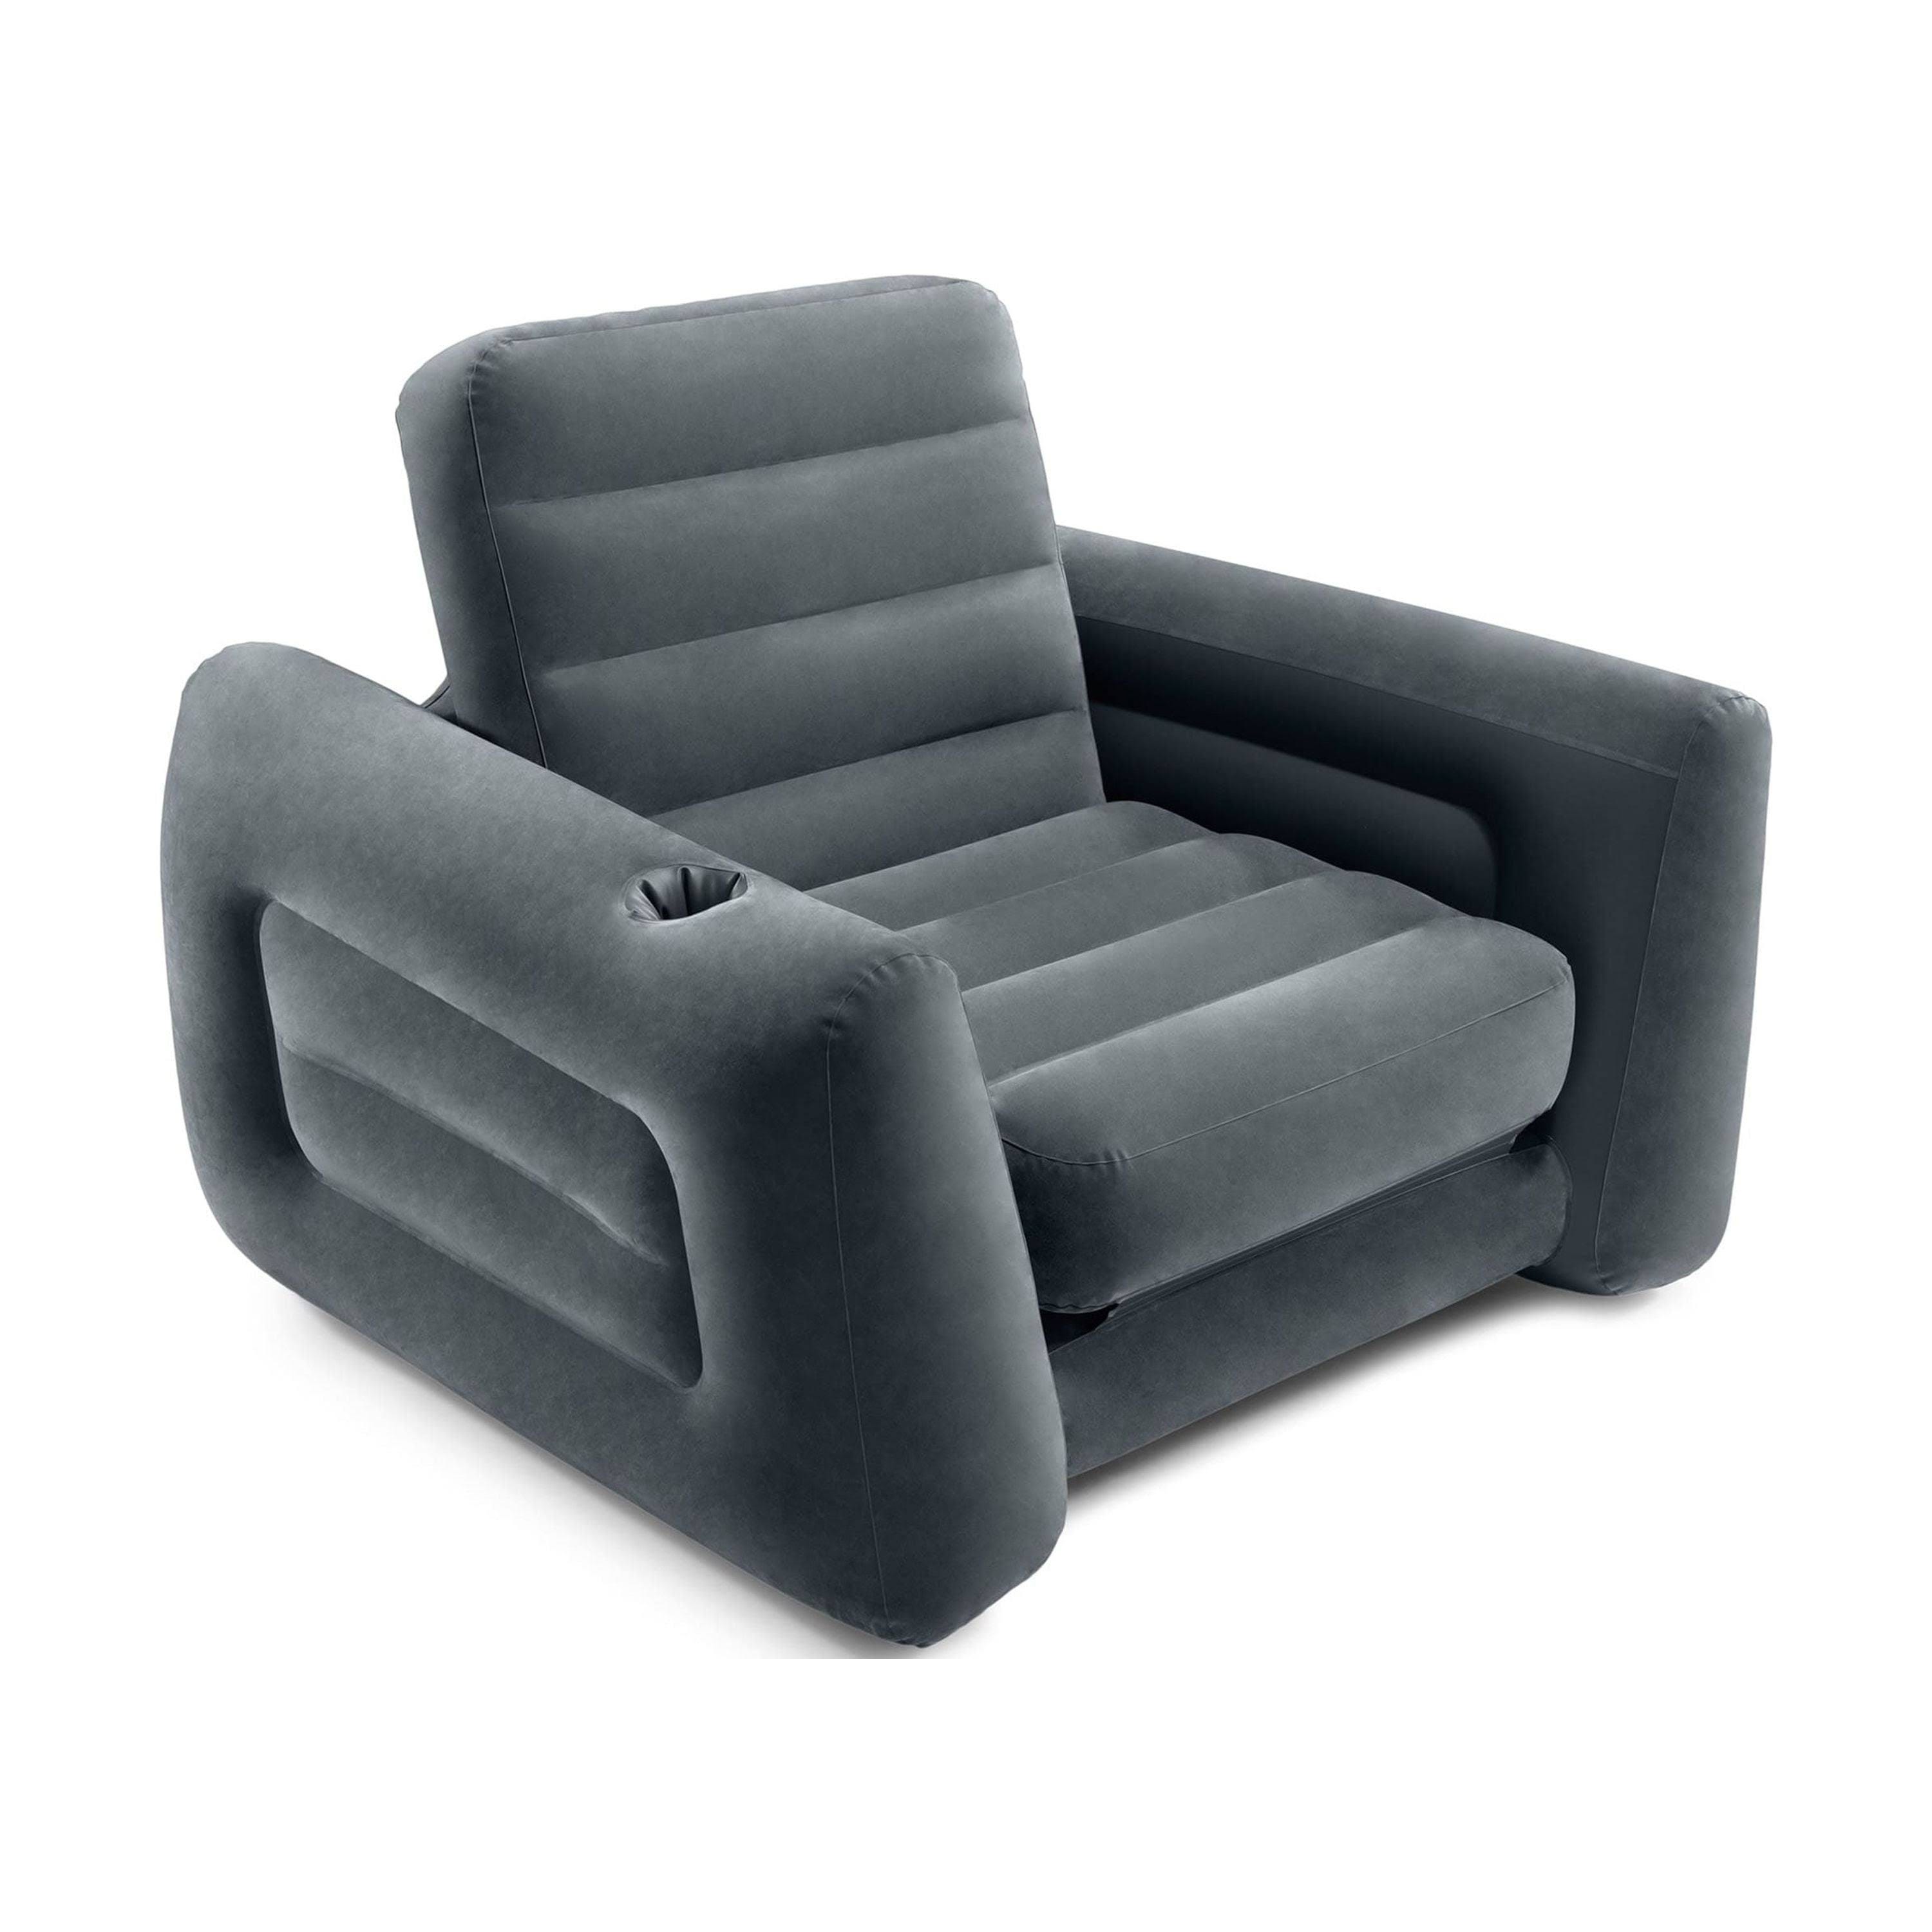 Inflatable Sofa Chair: Comfortable Air Mattress for Indoor and Outdoor Use | Image